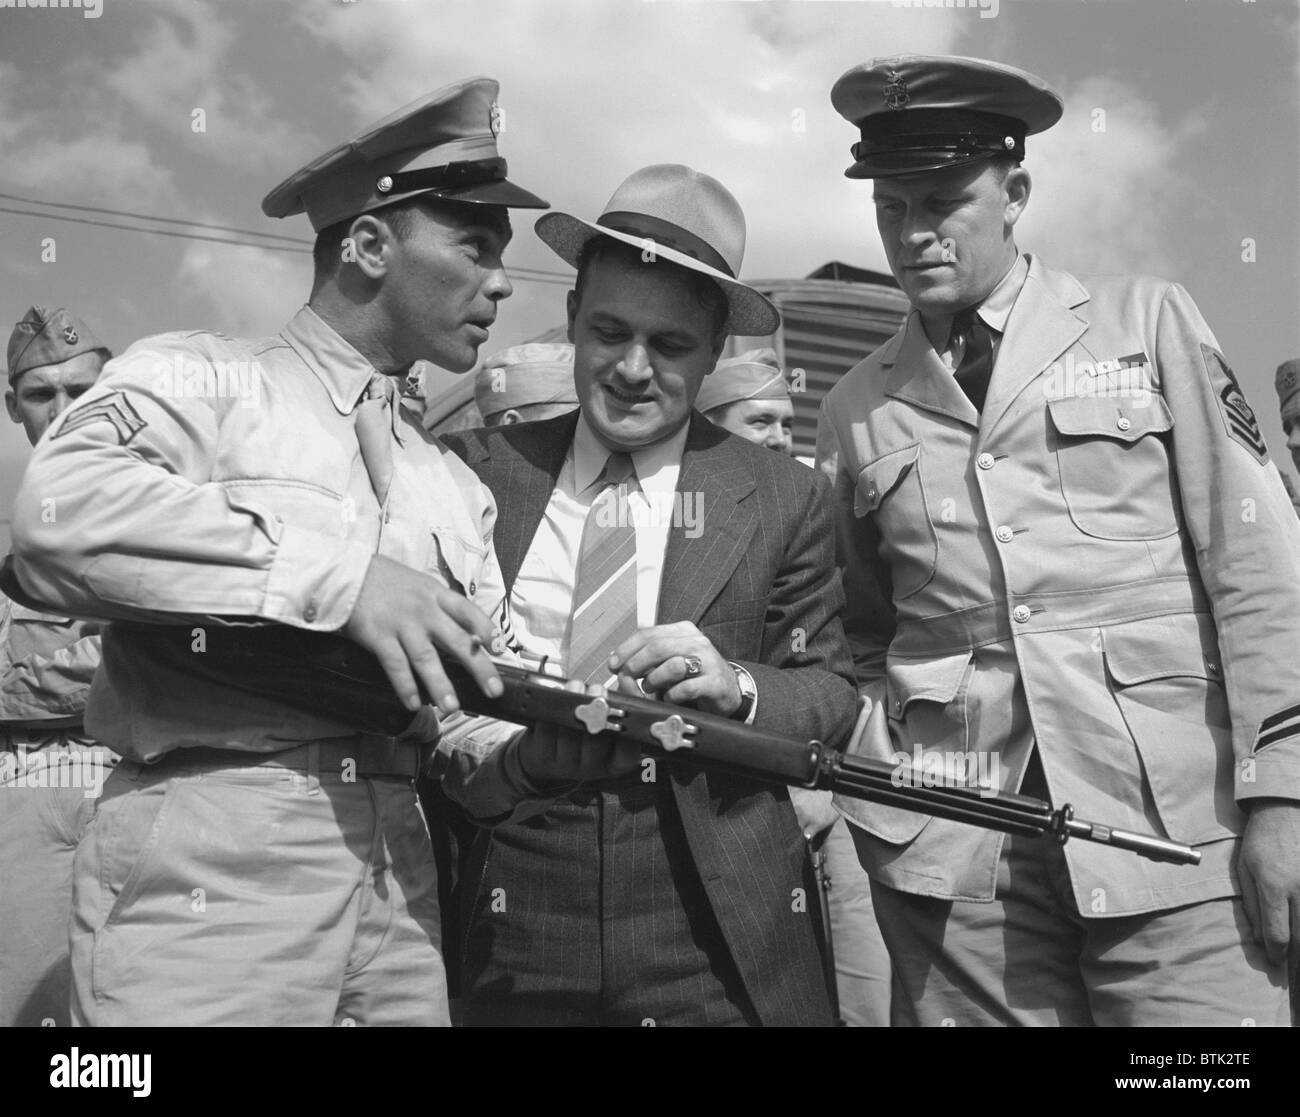 World War II, French L. Vineyard (left), at his army post, where welder George Woolslayer (center) and Aviation-radio Chief John Marshall Evans (right) learn about life in the Army, Pittsburgh, Pennsylvania, photograph by Alfred T. Palmer, August, 1942 Stock Photo